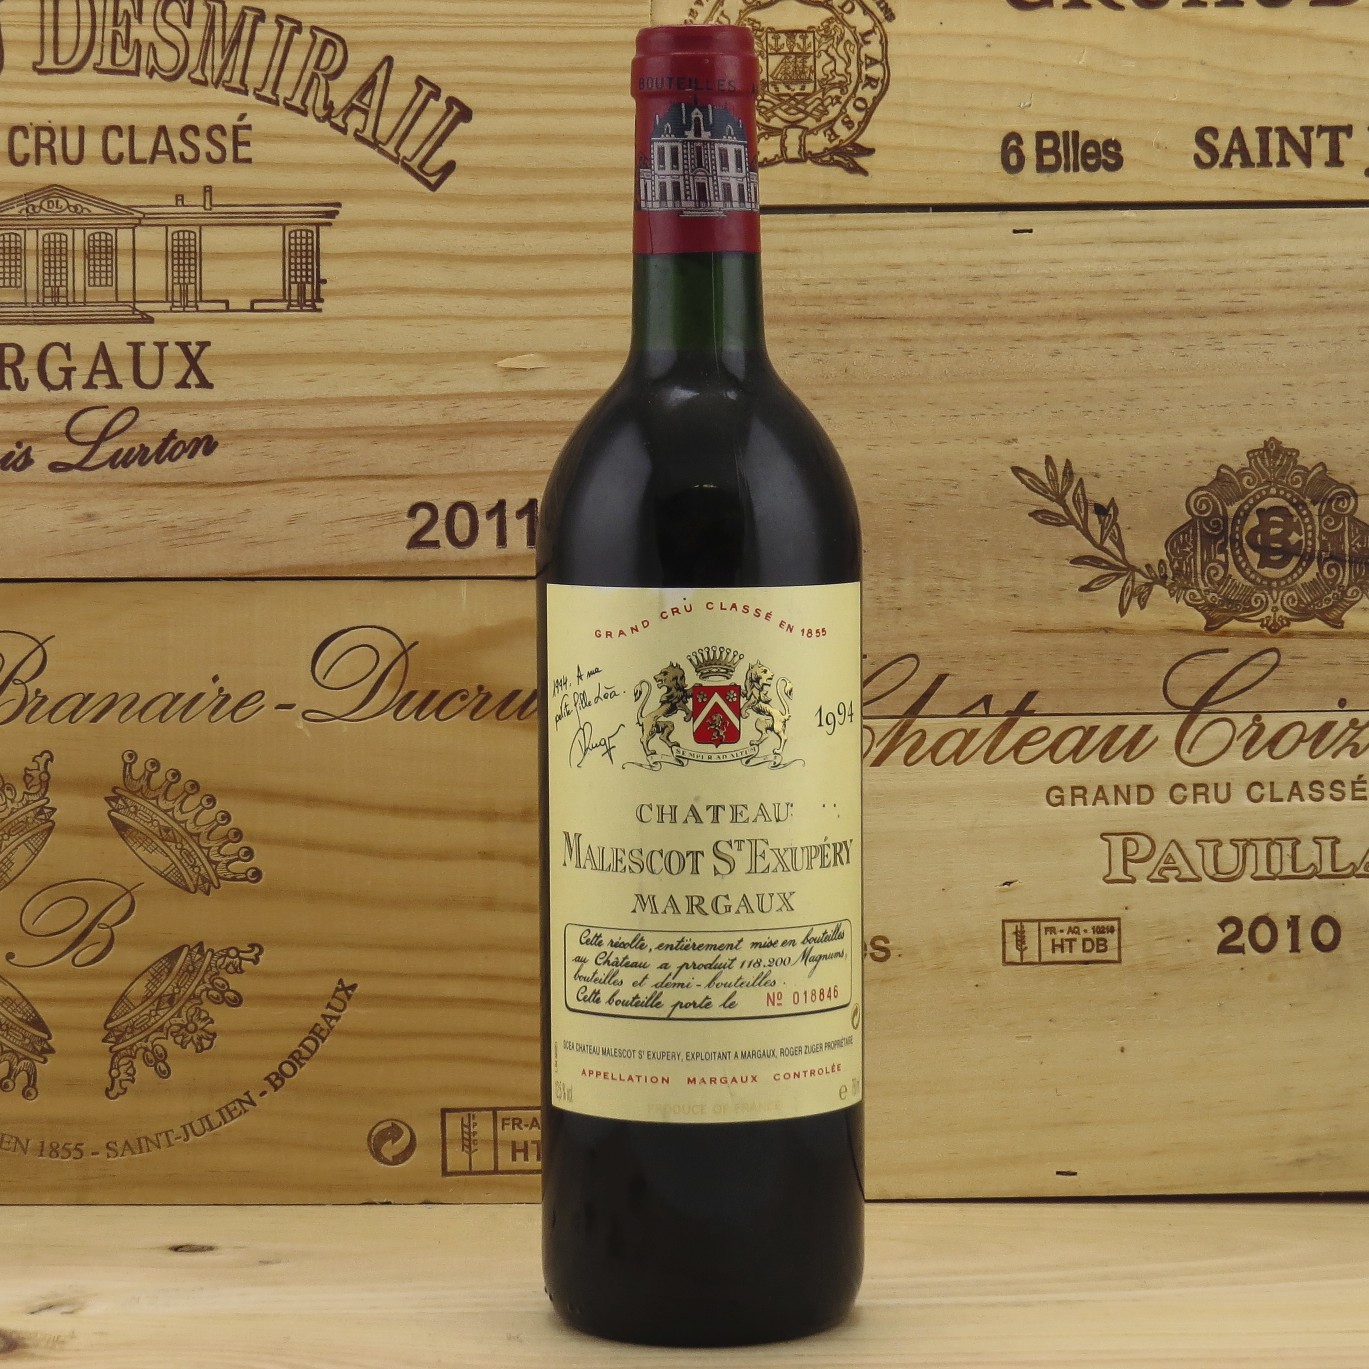 1994 Chateau Malescot St. Exupery